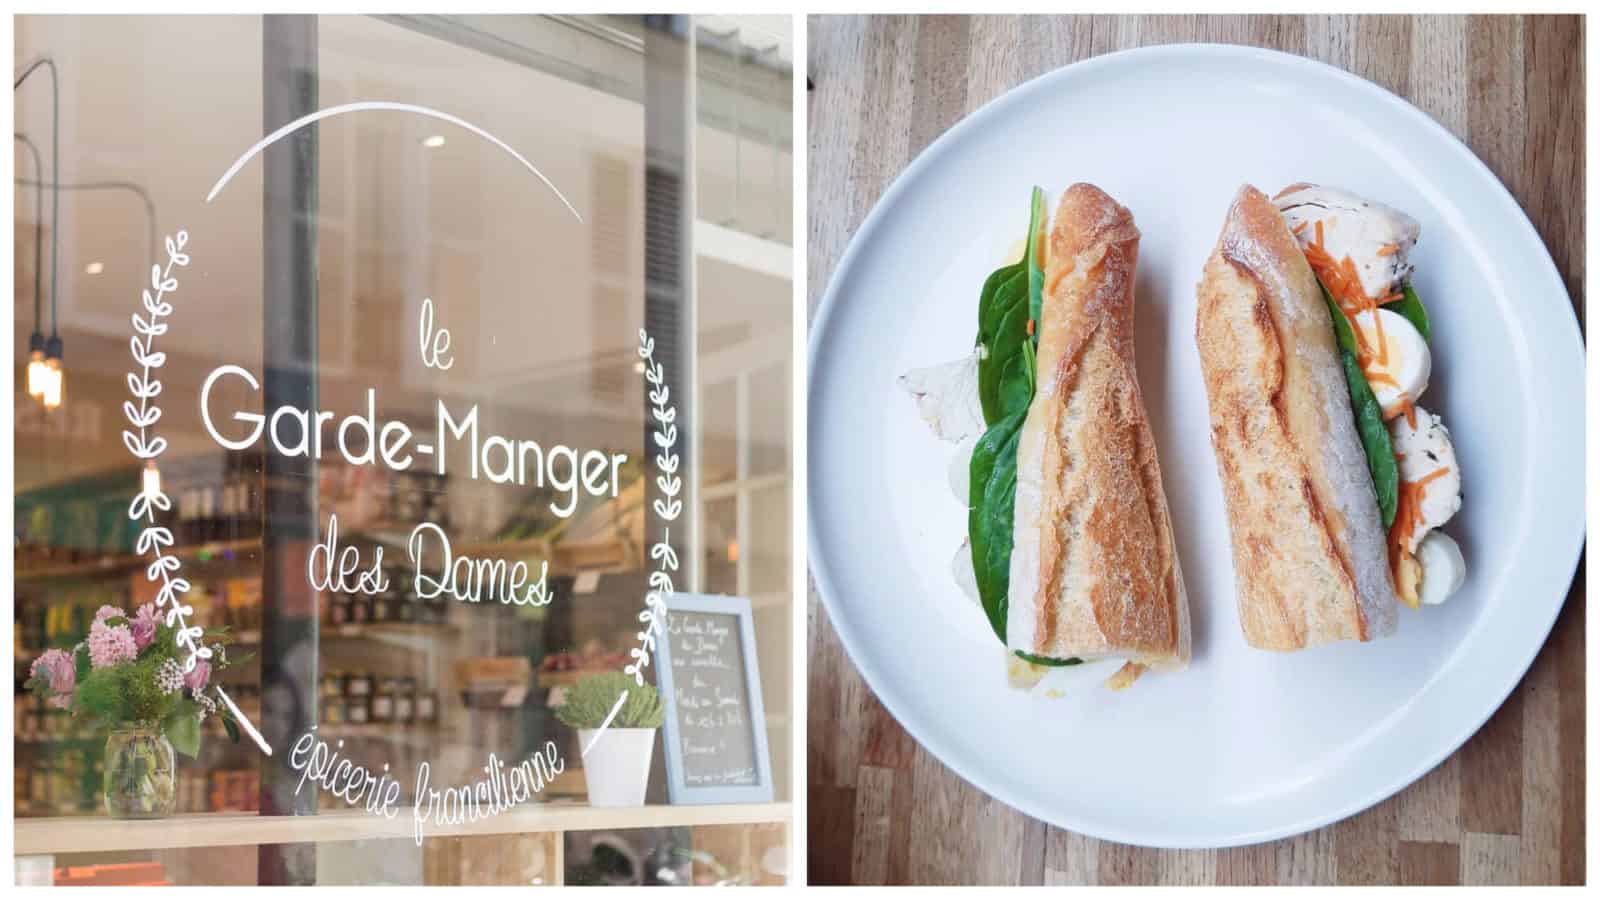 Le Garde Manger des Dames in the Batignolles area of Paris is a go-to for sustainably sourced food and it's also a cafe that makes tasty baguette sandwiches.